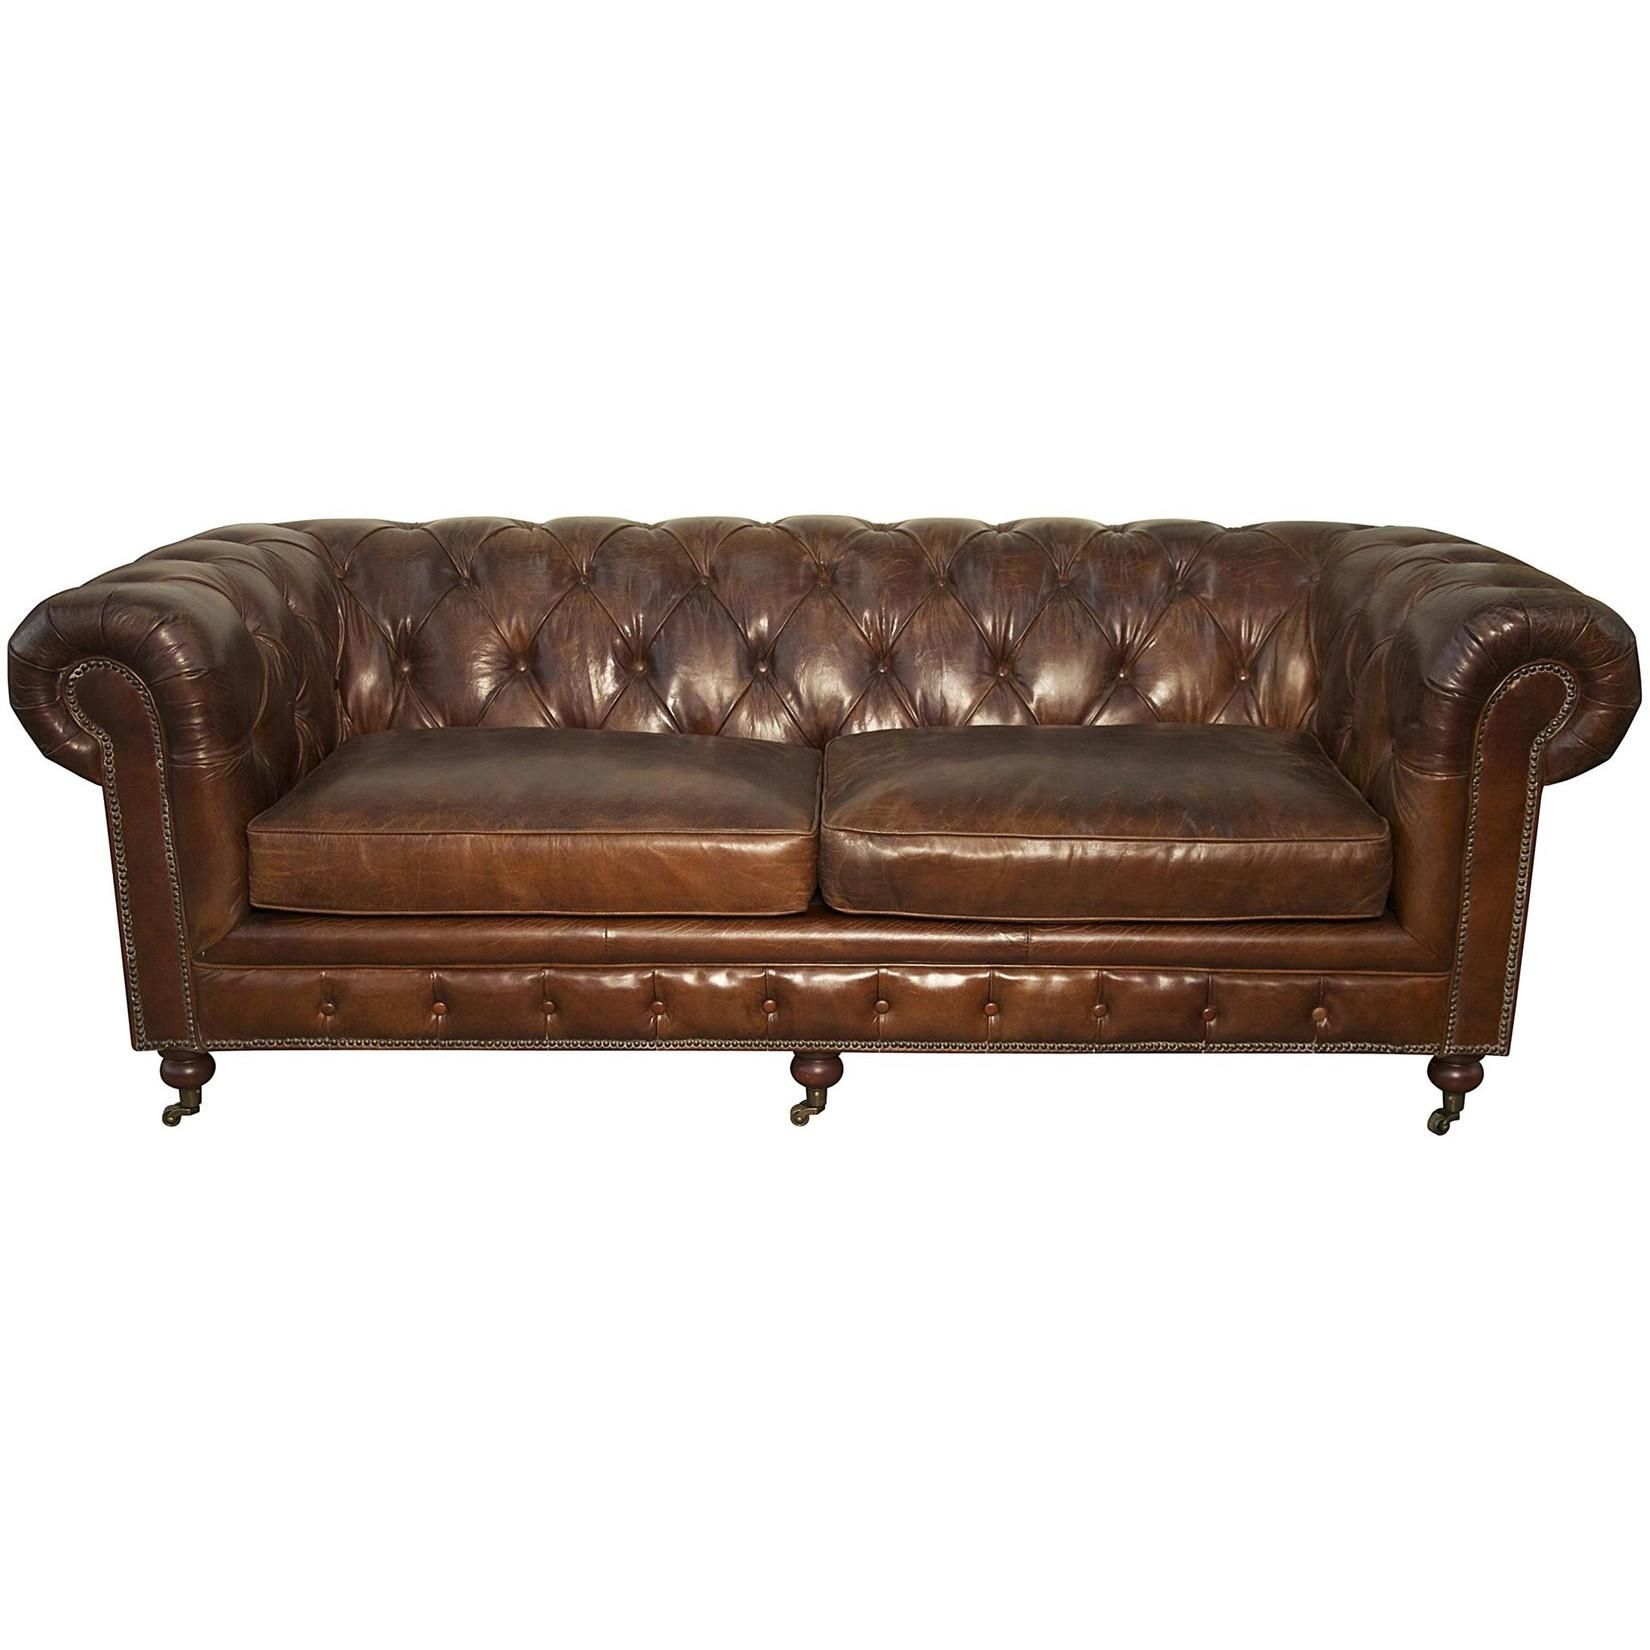 Furniture: Exquisite Comfort With Leather Tufted Sofa With Regard To Overstuffed Sofas And Chairs (View 19 of 20)